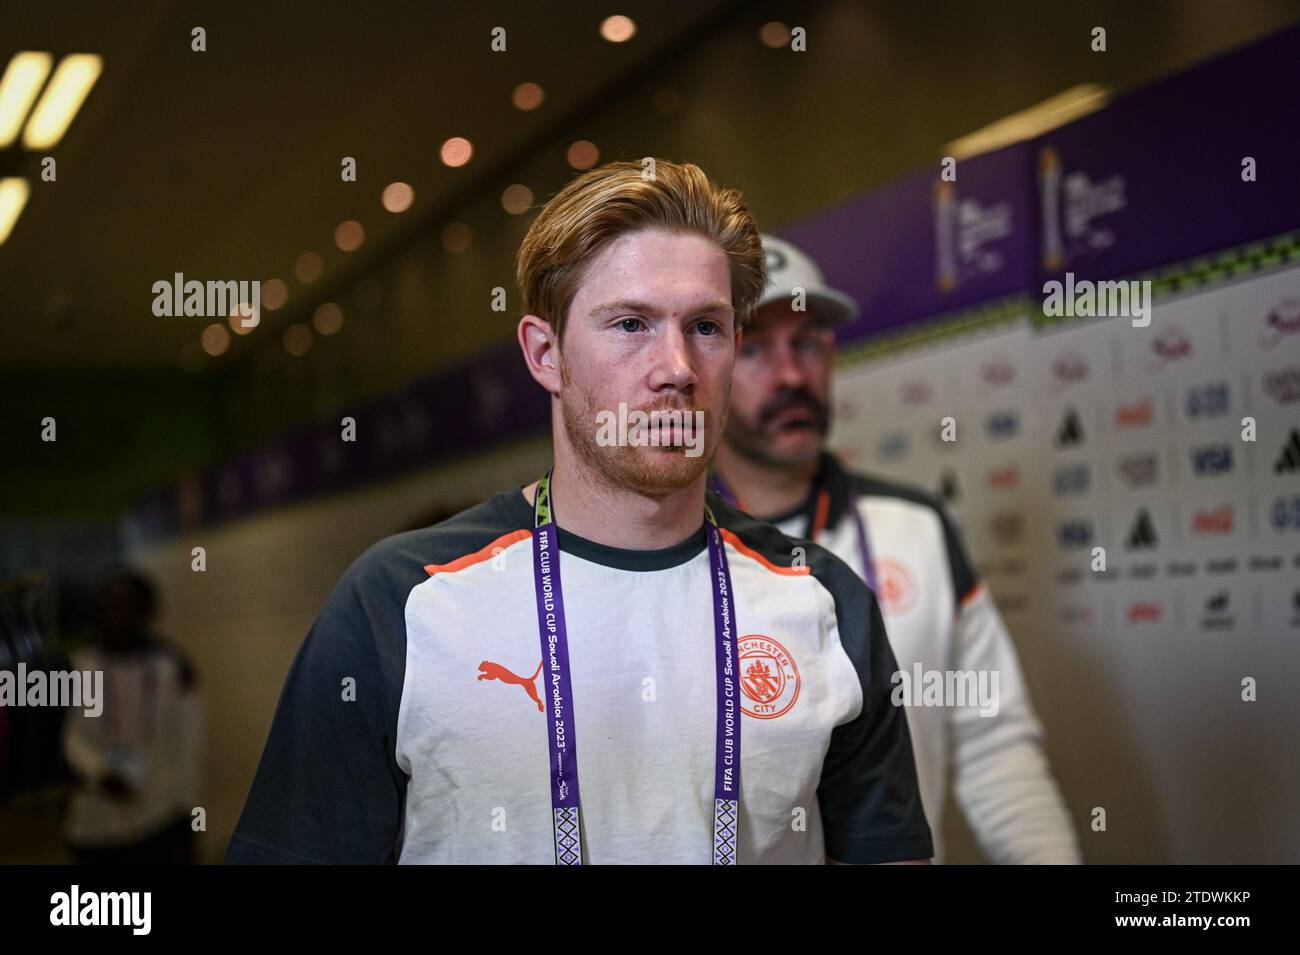 Jeddah, Saudi Arabia. 19th Dec, 2023. King Abdullah Sports City Kevin De Bruyne of Manchester City arrive at stadium before the FIFA Club World Cup Semi Final between Urawa Reds of Japan and Manchester City of England at the King Abdullah Sports City Stadium in Jeddah, Saudi Arabia. City won the game 3-0 and will play Fluminense of Brazil in the final on Friday. (Alexandre Neto/SPP) Credit: SPP Sport Press Photo. /Alamy Live News Stock Photo